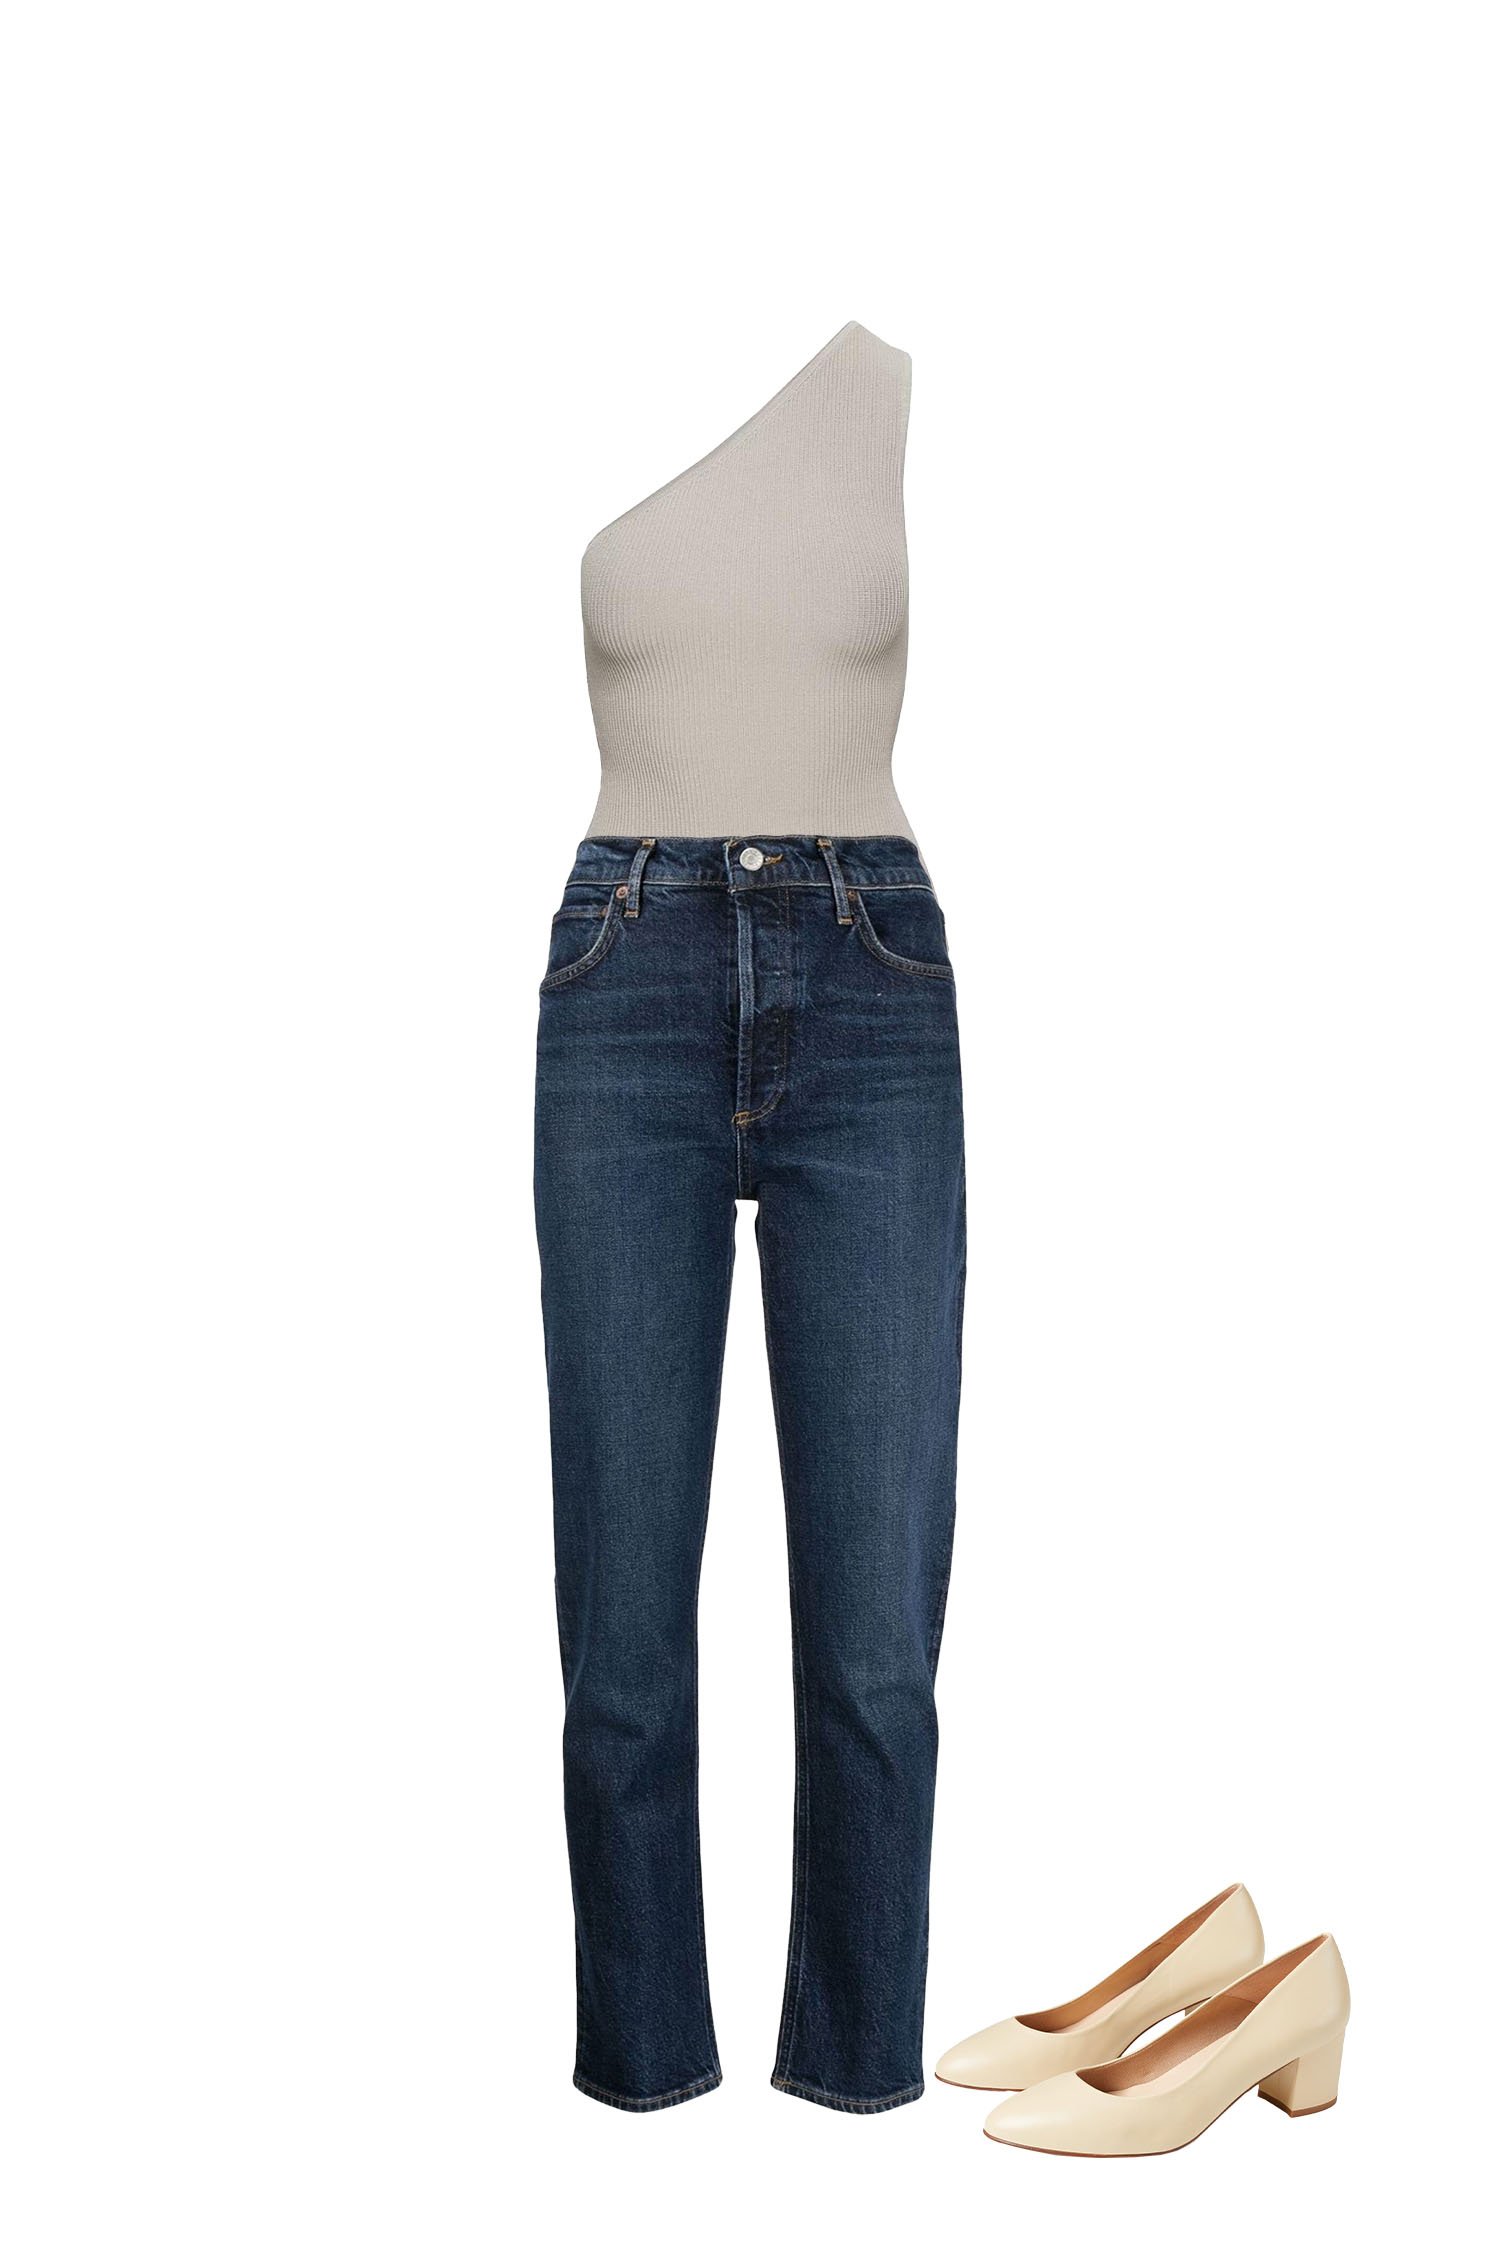 High Waisted Straight Leg Jeans - Taupe One-Shoulder Ribbed Top - Cream Block Heel Pumps